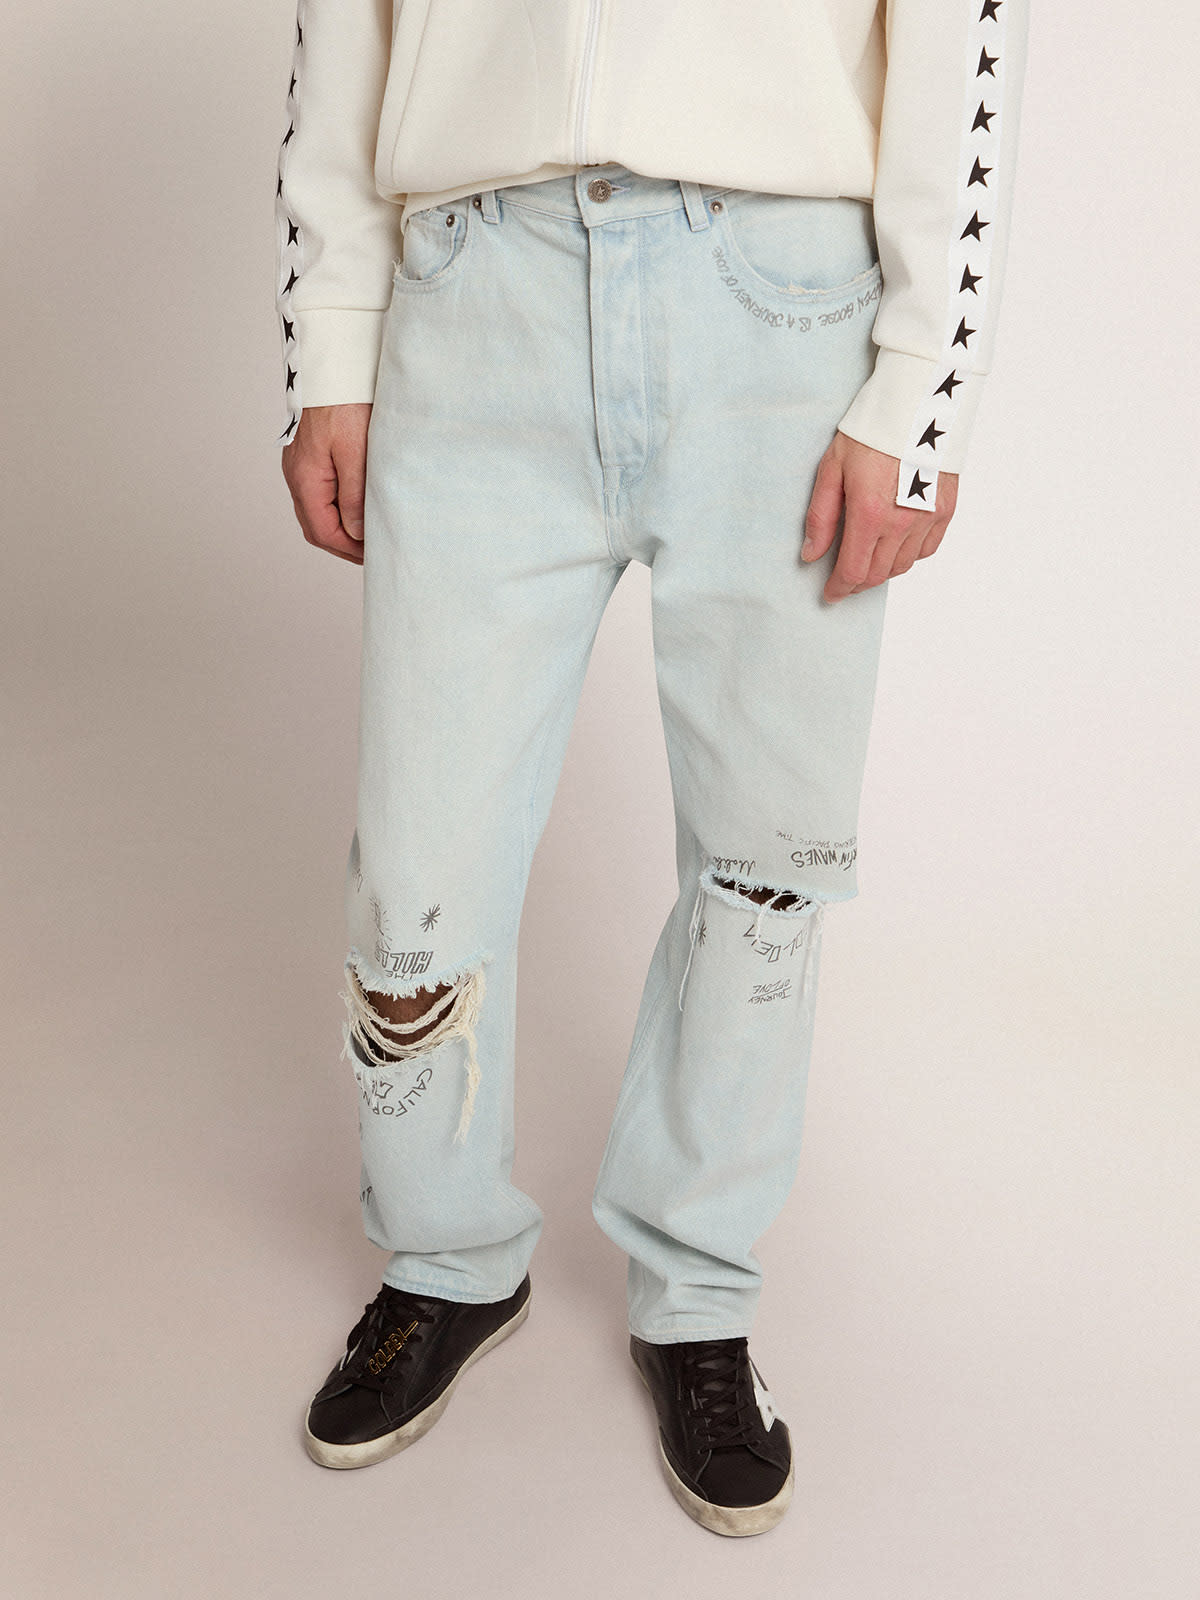 Golden Goose - Men's bleached jeans with distressed treatment in 